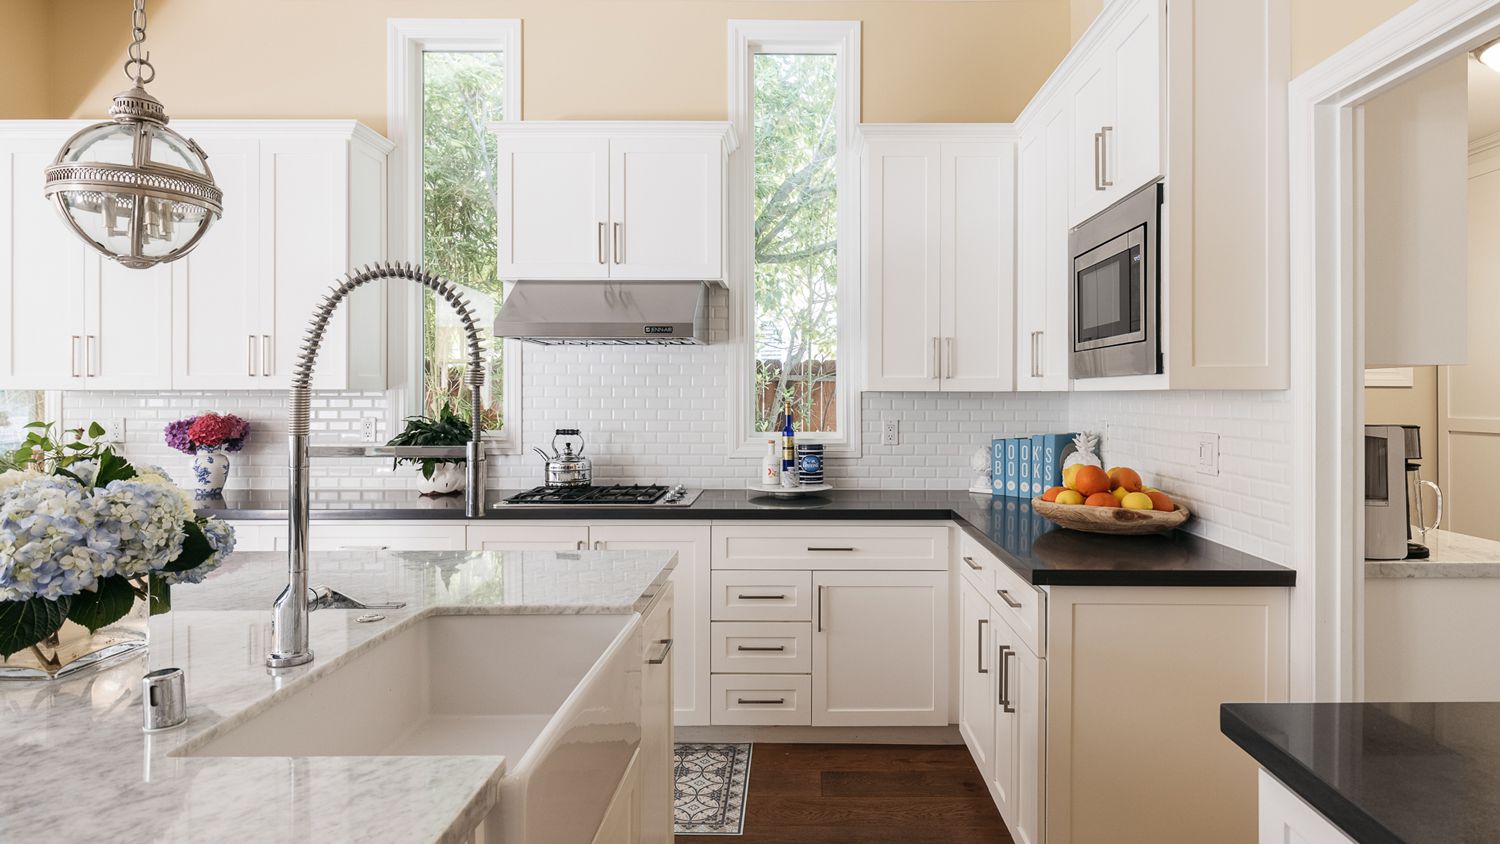 Choose a light colour for your cabinets and countertops